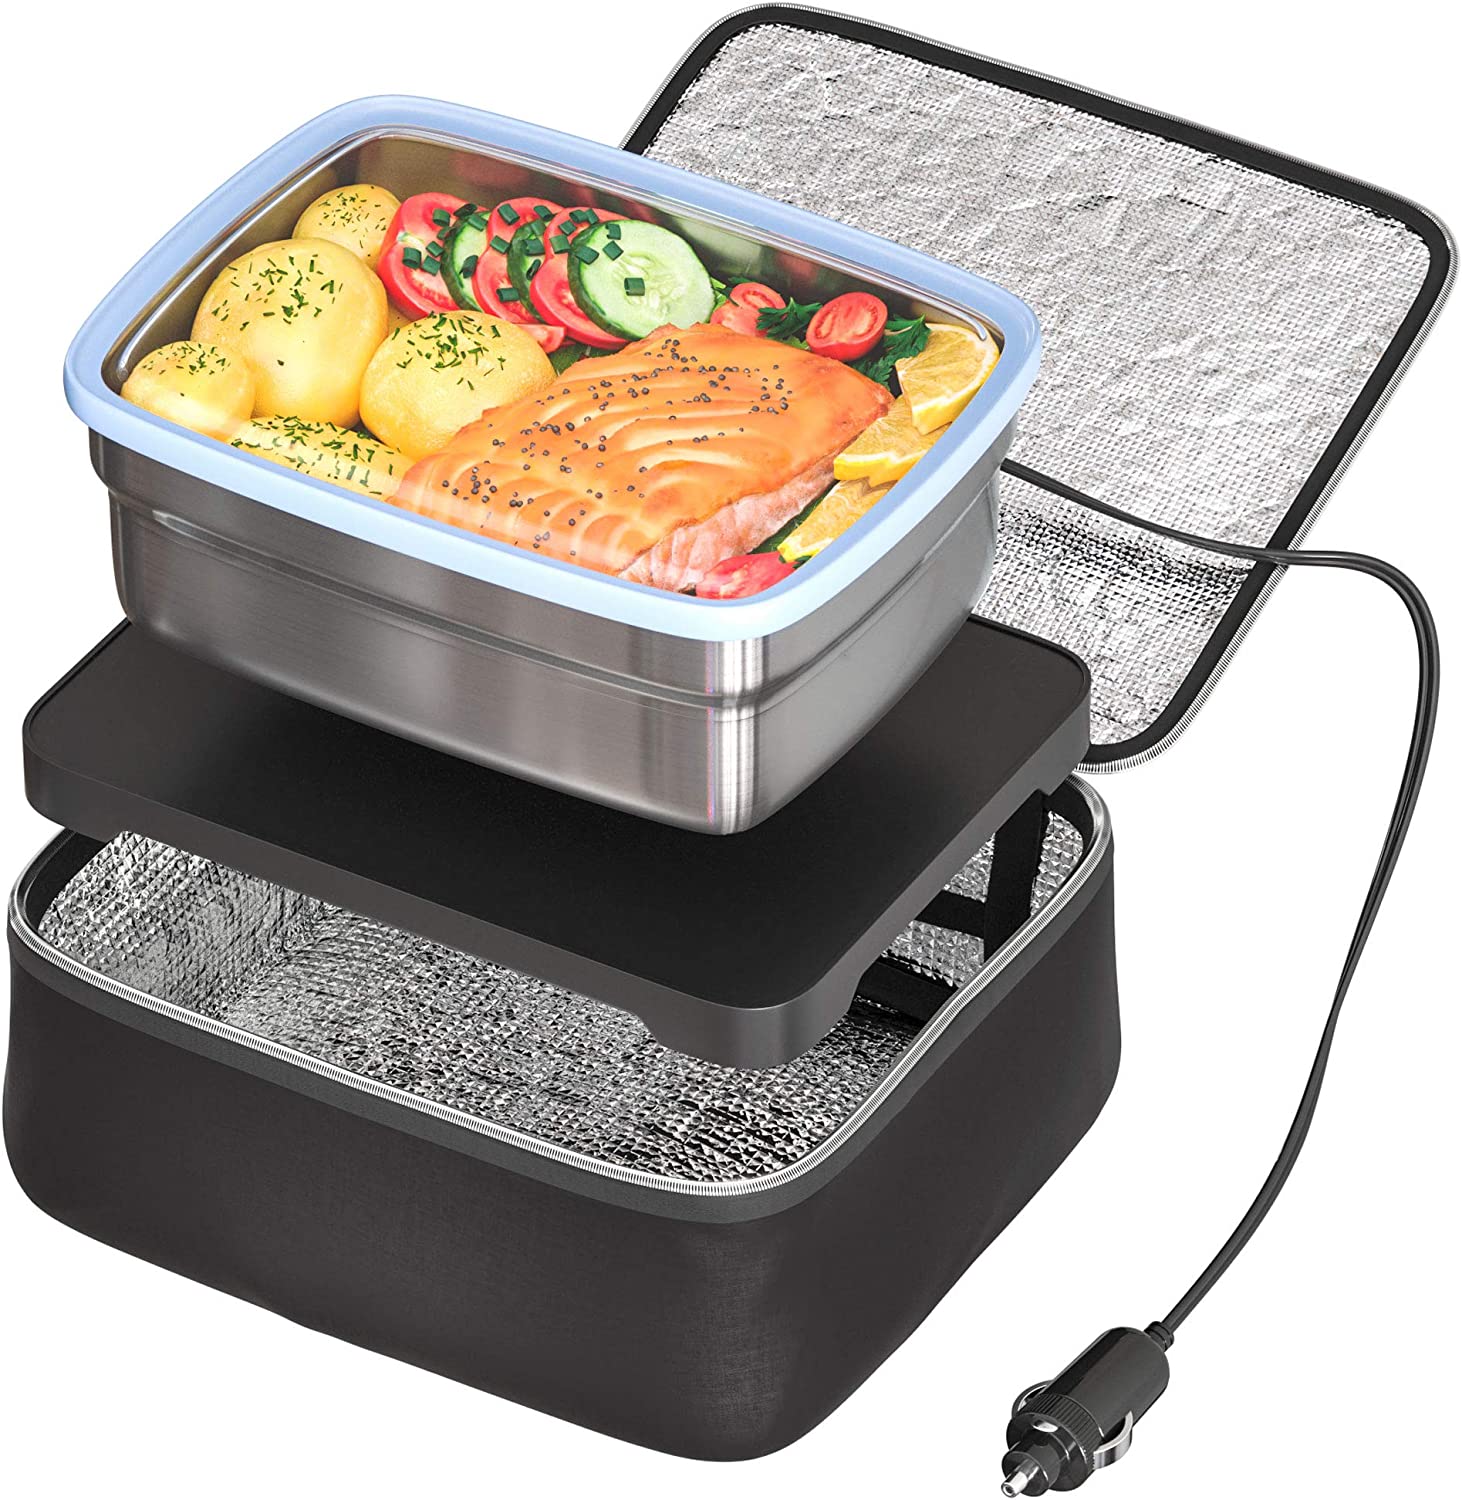 Skwyin Portable Food Warmer Lunch Box, 12V Mini Oven for Personal